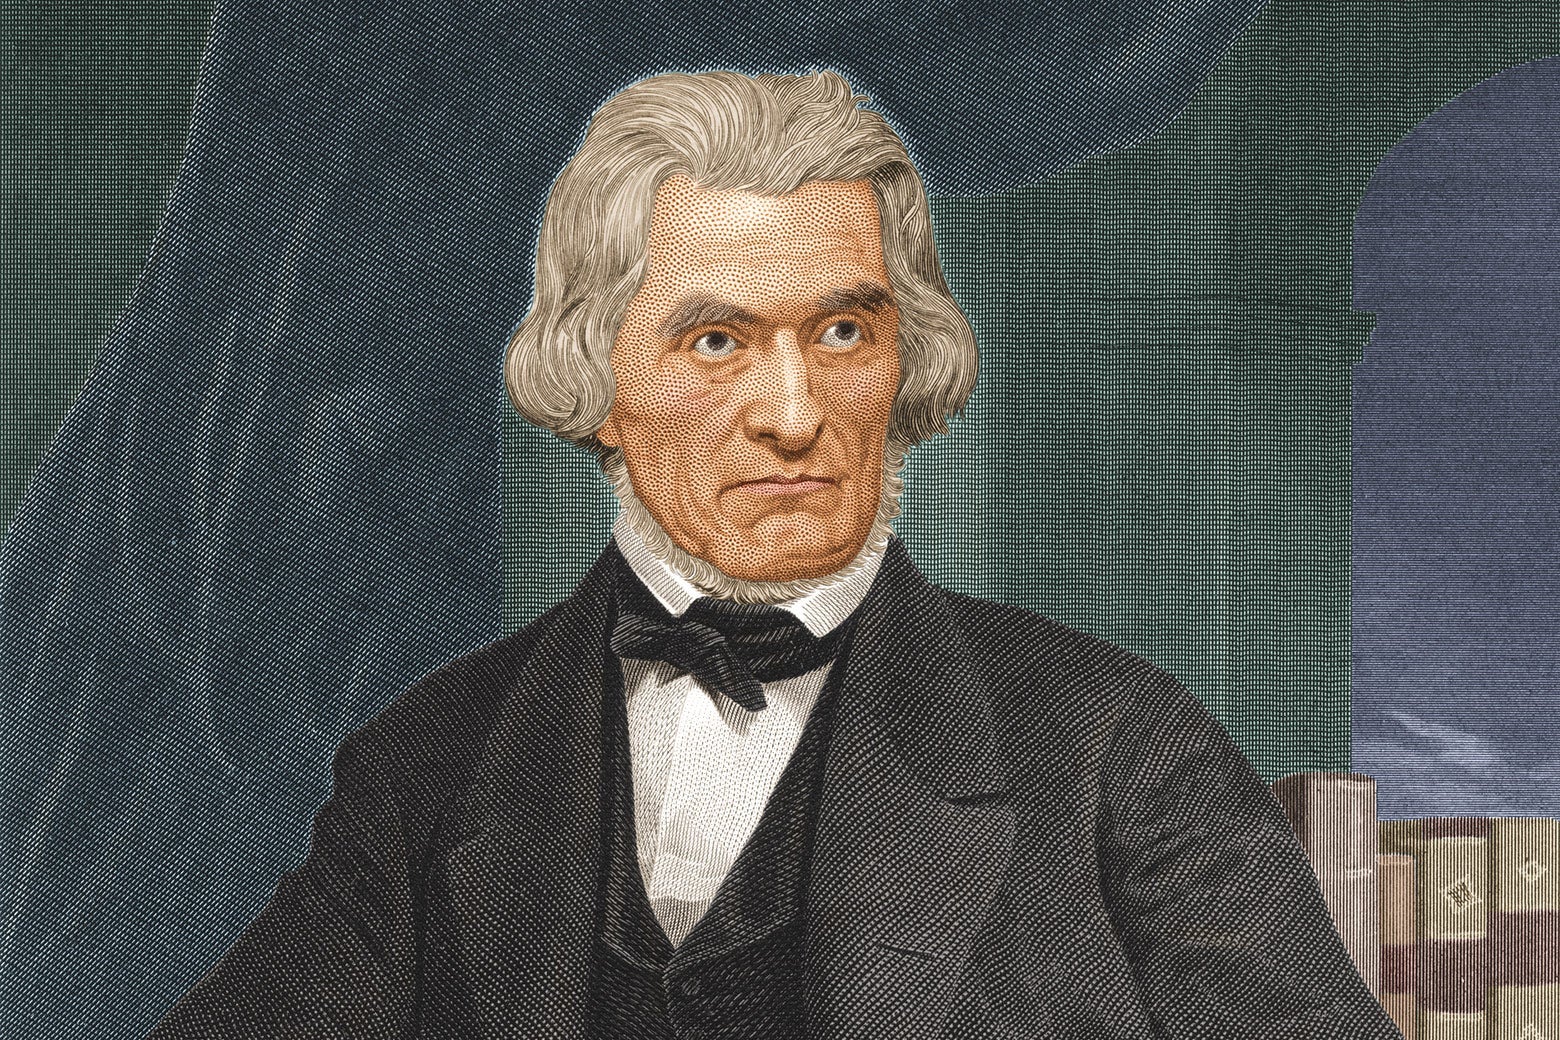 Painting of Calhoun looking stern in front of a curtain and a bookshelf